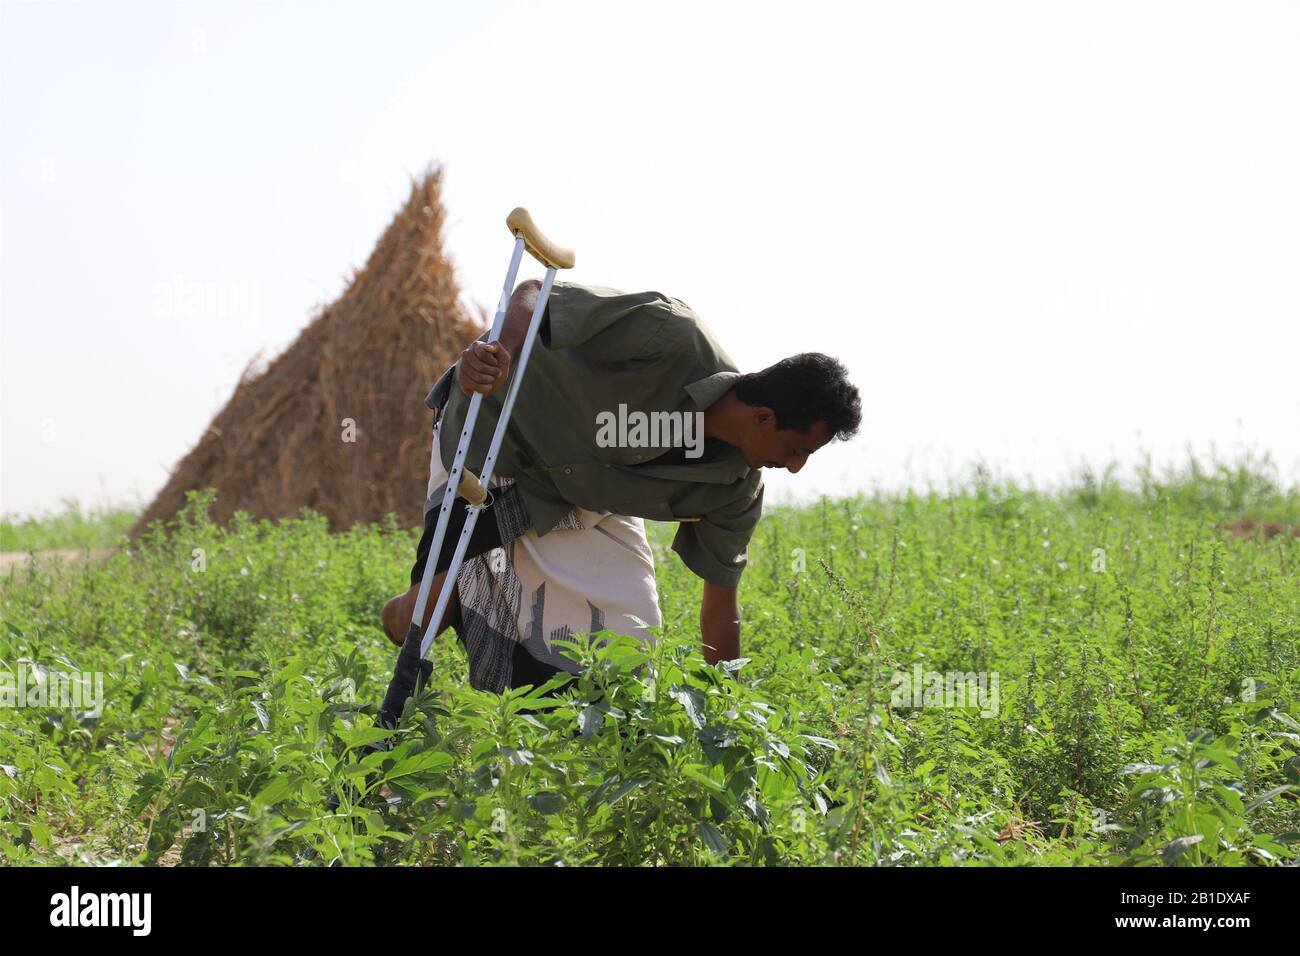 Hajjah, Yemen. 24th Feb, 2020. A landmine victim works at a farm in Midi District of Hajjah Province, Yemen, Feb. 24, 2020. According to the United Nations, thousands of landmines, unexploded ordnance, and other explosive remnants of war have been left behind during the ongoing conflict in Yemen. Credit: Mohammed Alwafi/Xinhua/Alamy Live News Stock Photo